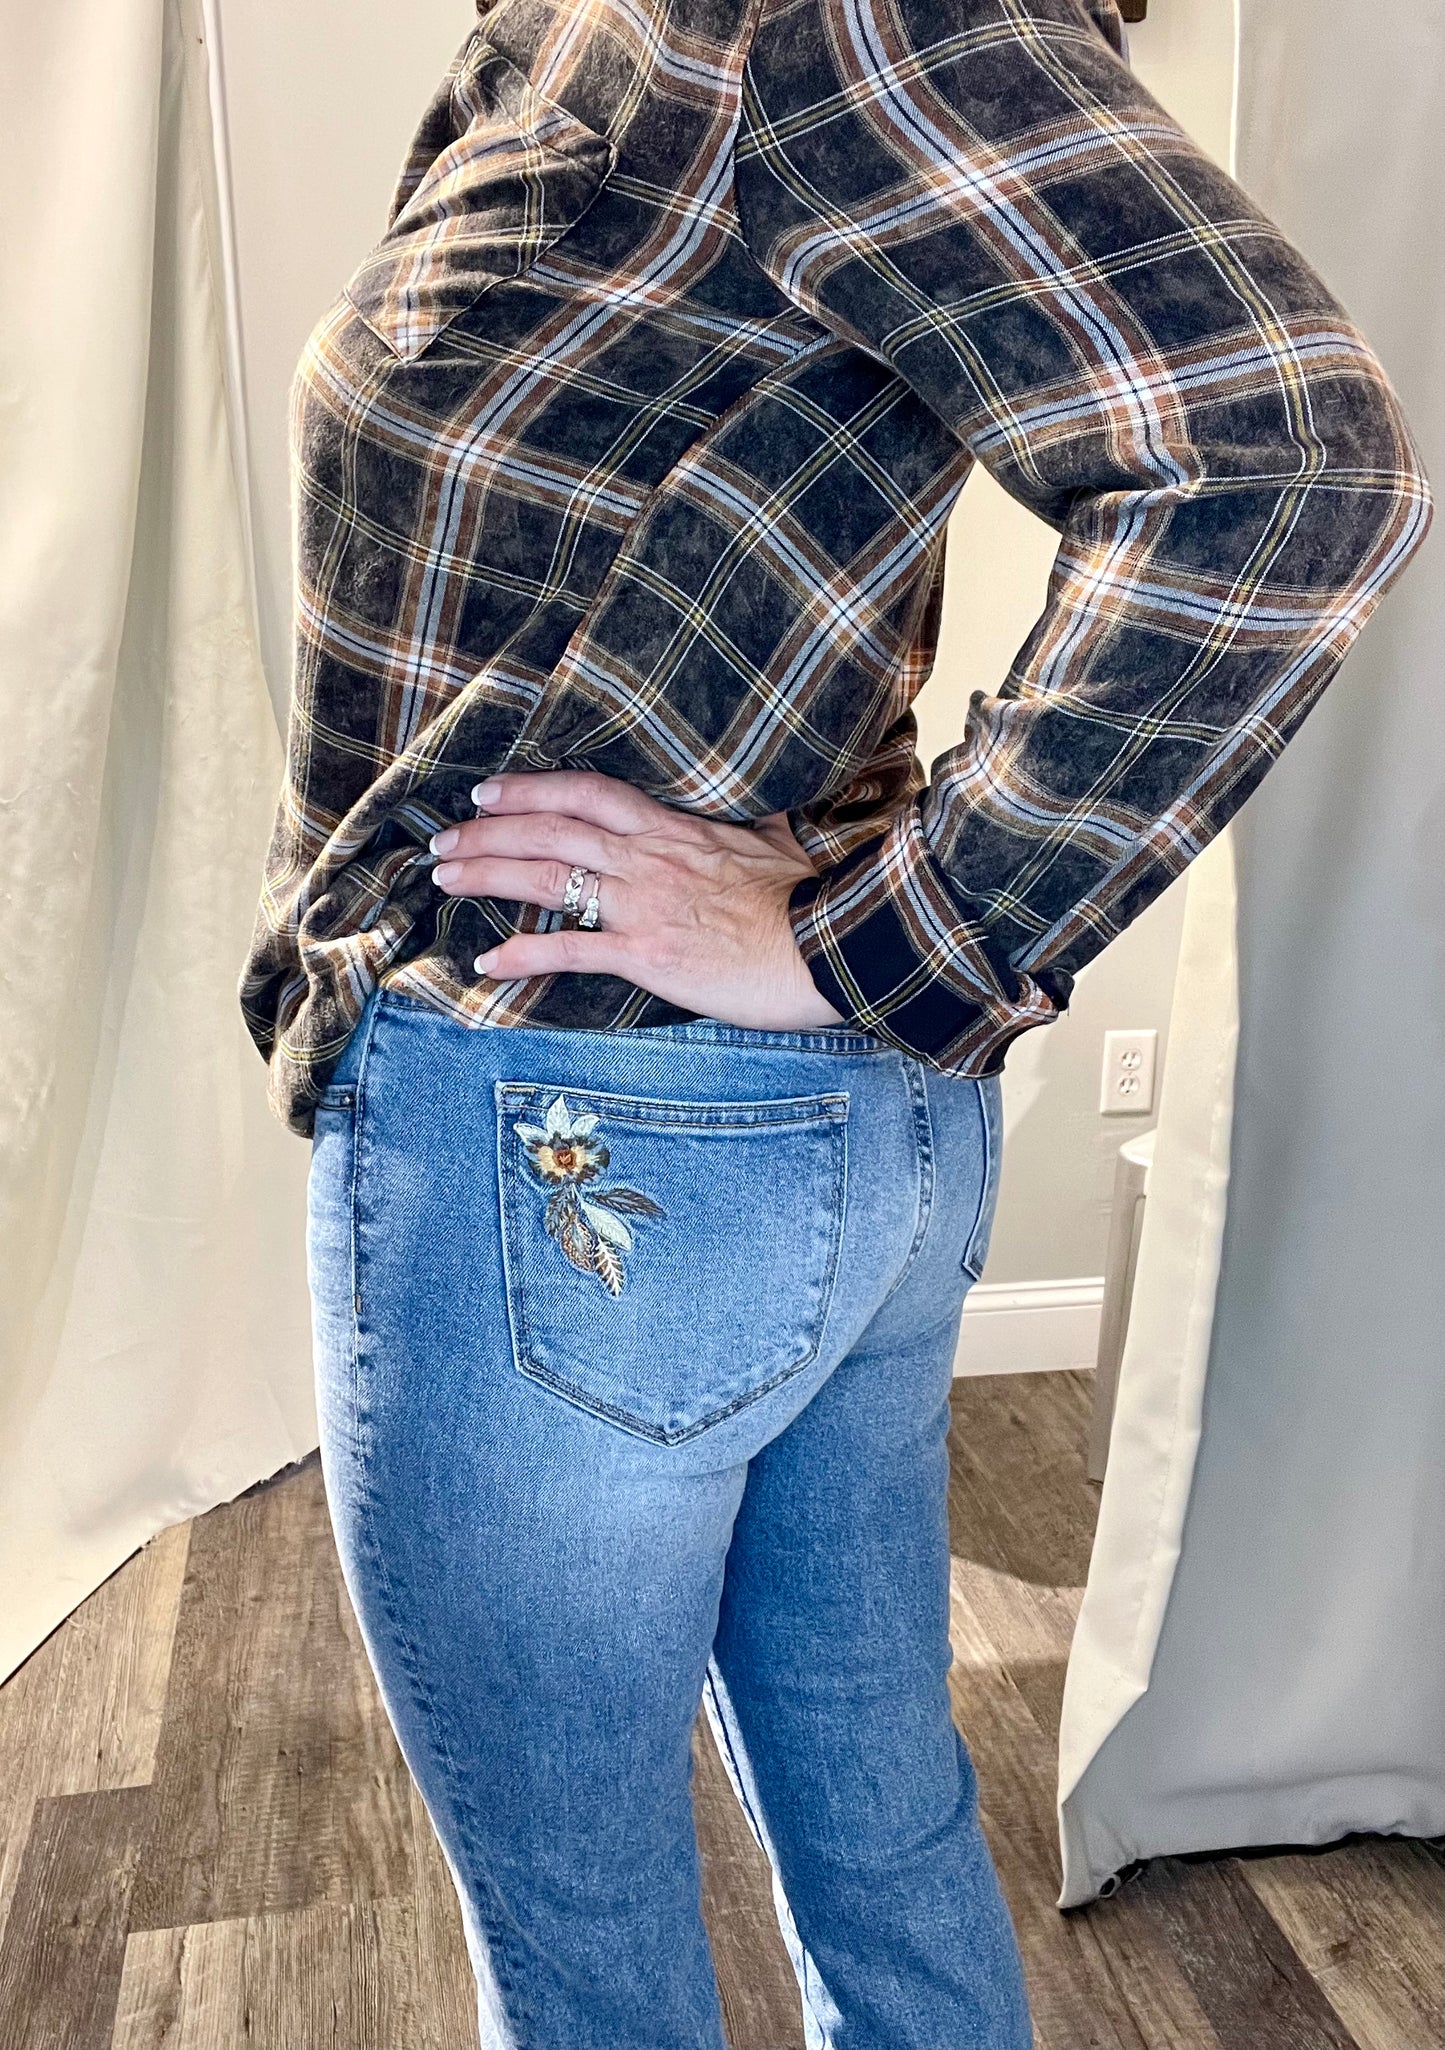 Driftwood Colette in Falling Floral Jeans